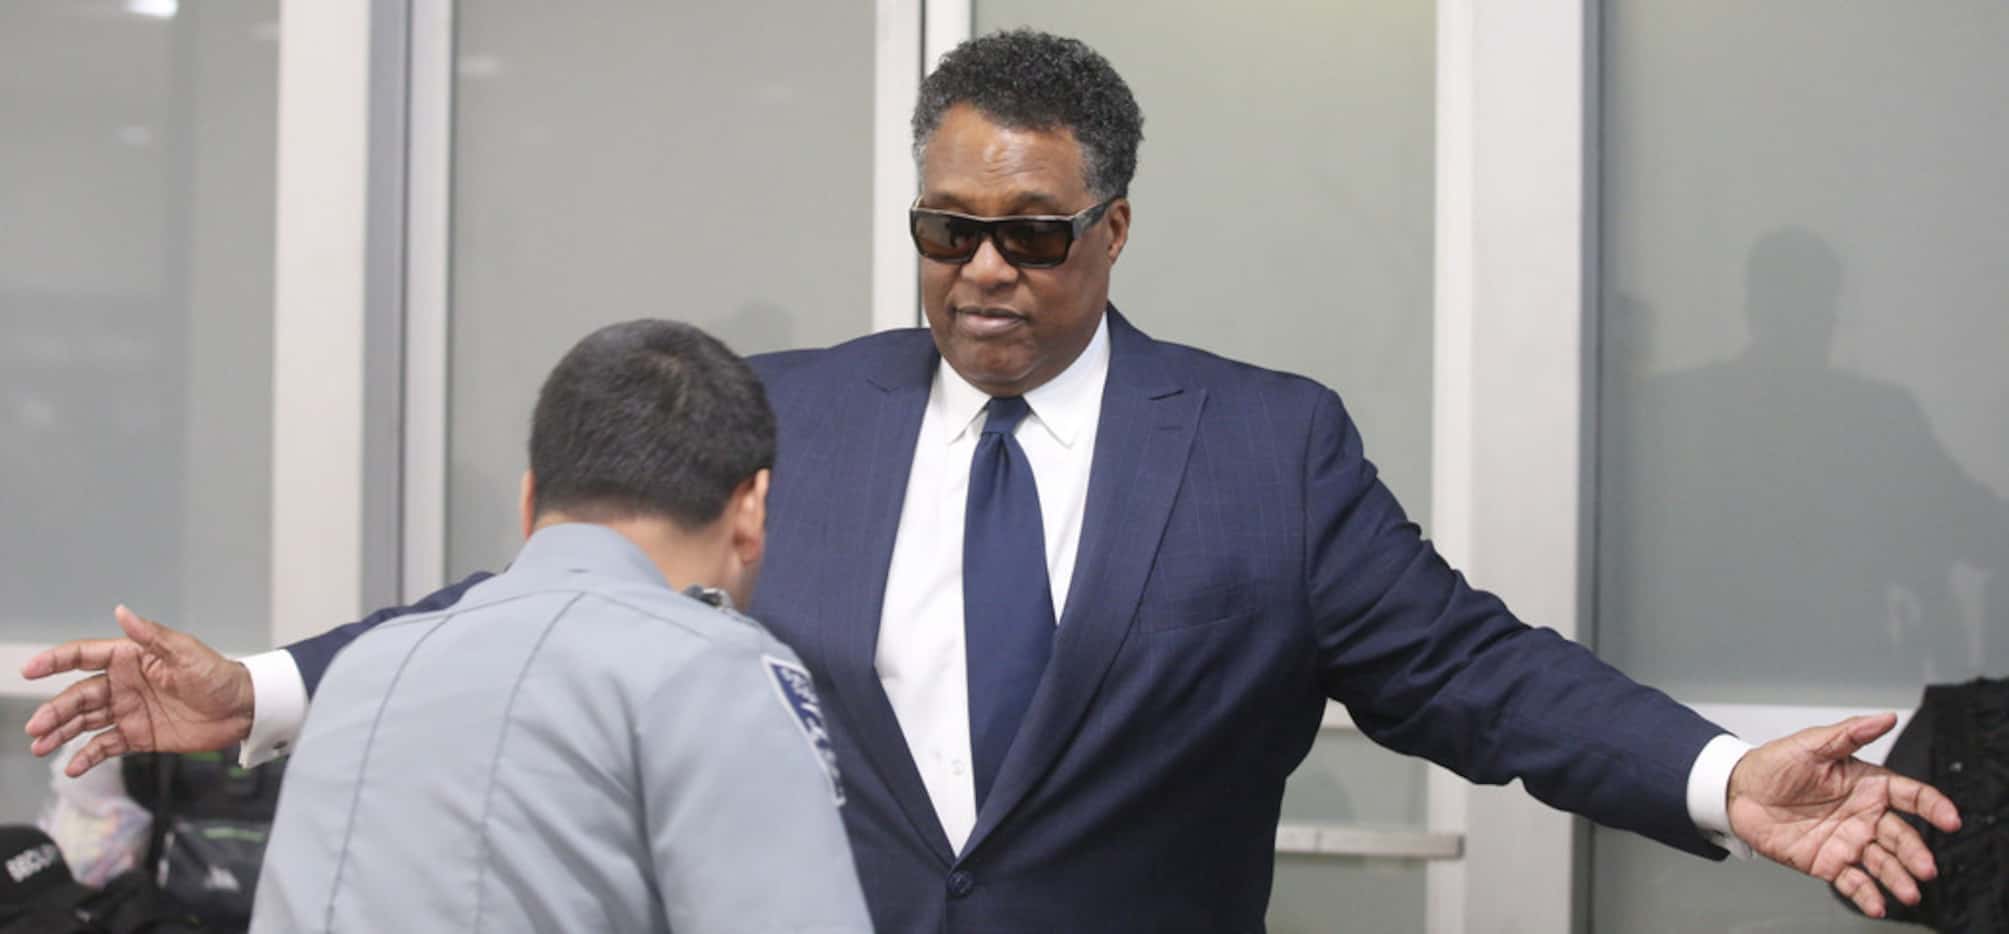 Dwaine Caraway arrives at the Earle Cabell Federal Building for sentencing. Caraway had...